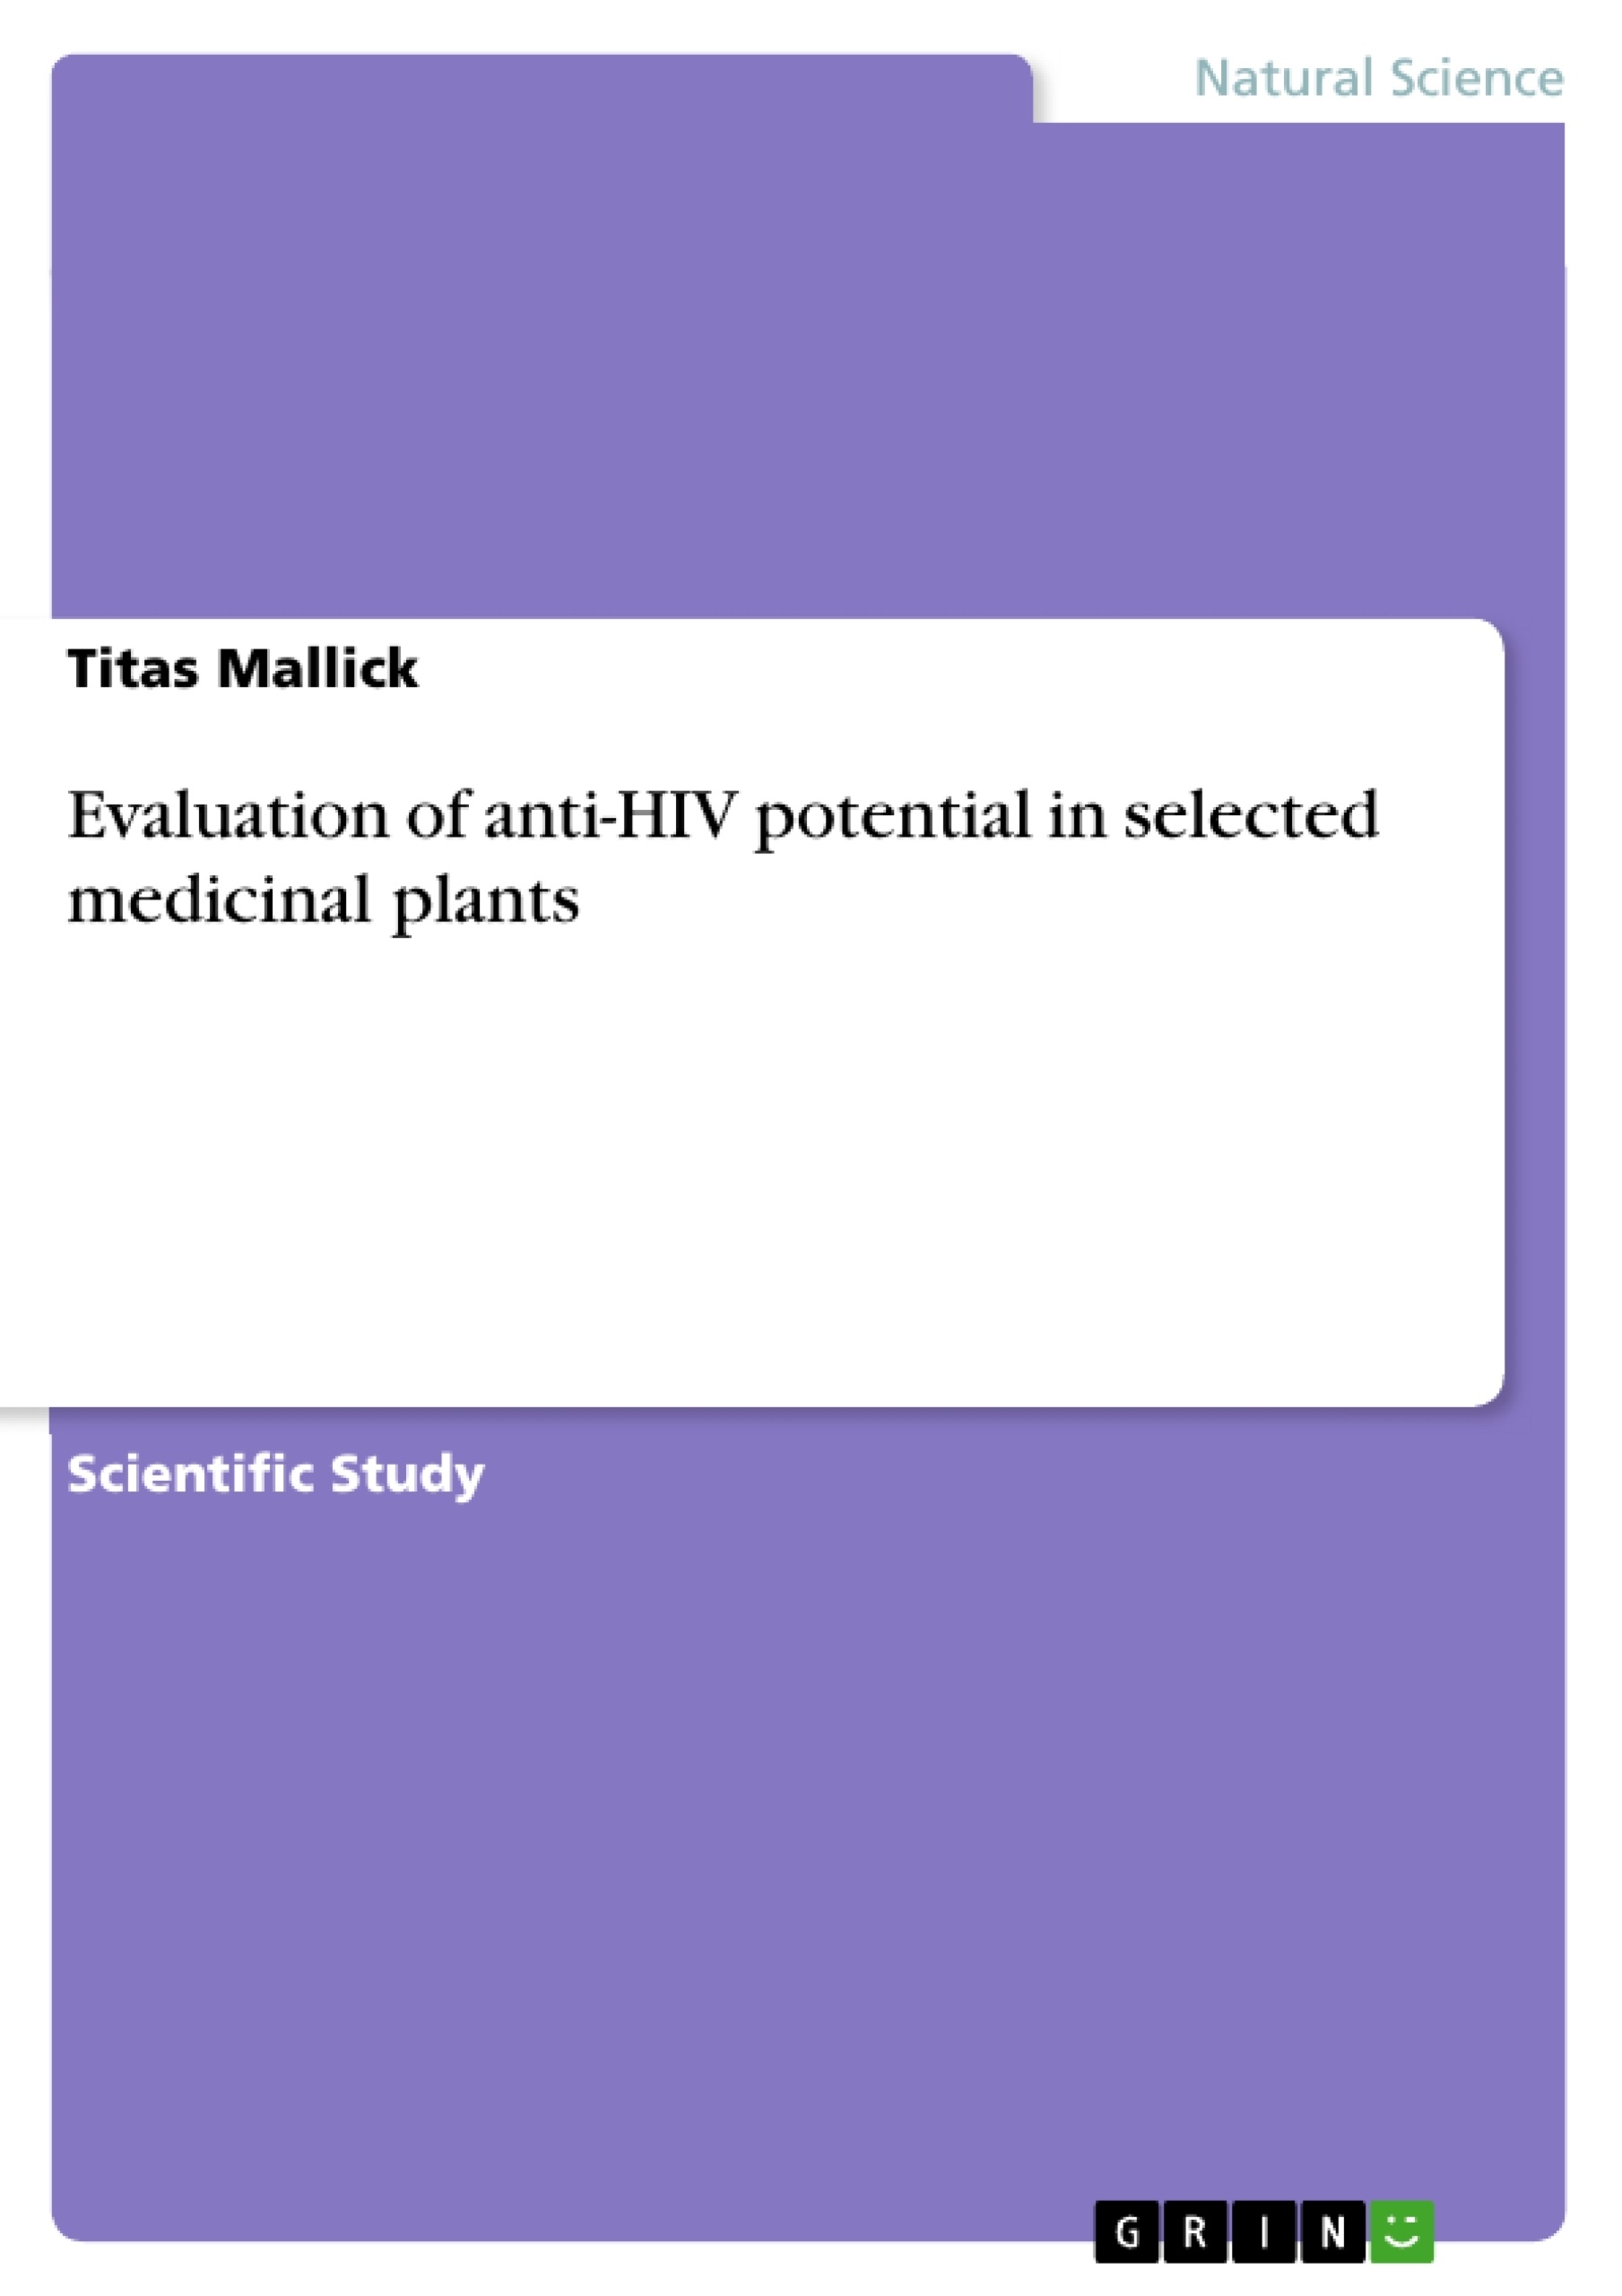 Title: Evaluation of anti-HIV potential in selected medicinal plants